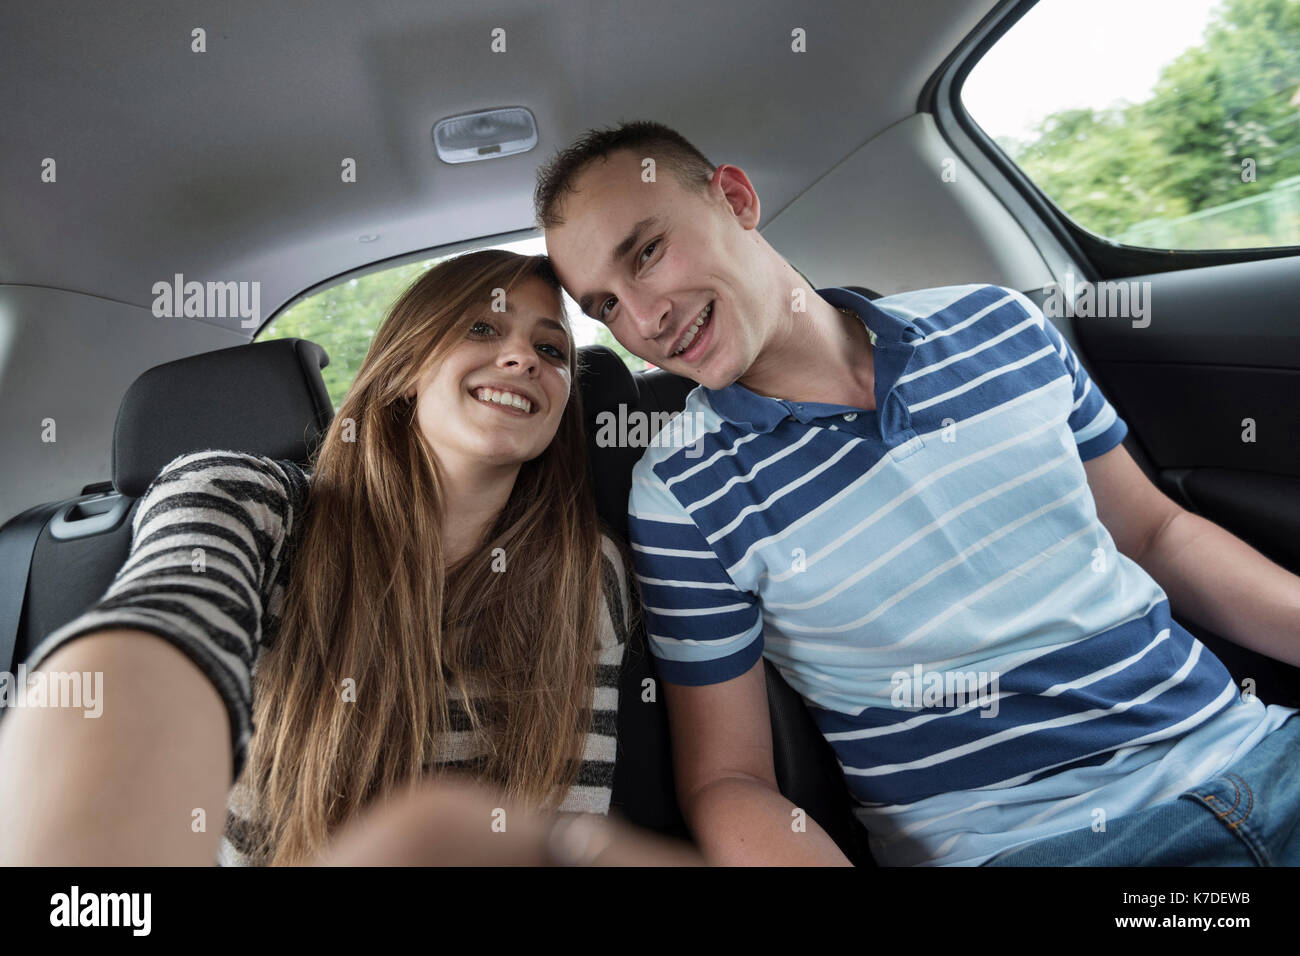 Portrait of happy couple sitting on car during vacation Stock Photo